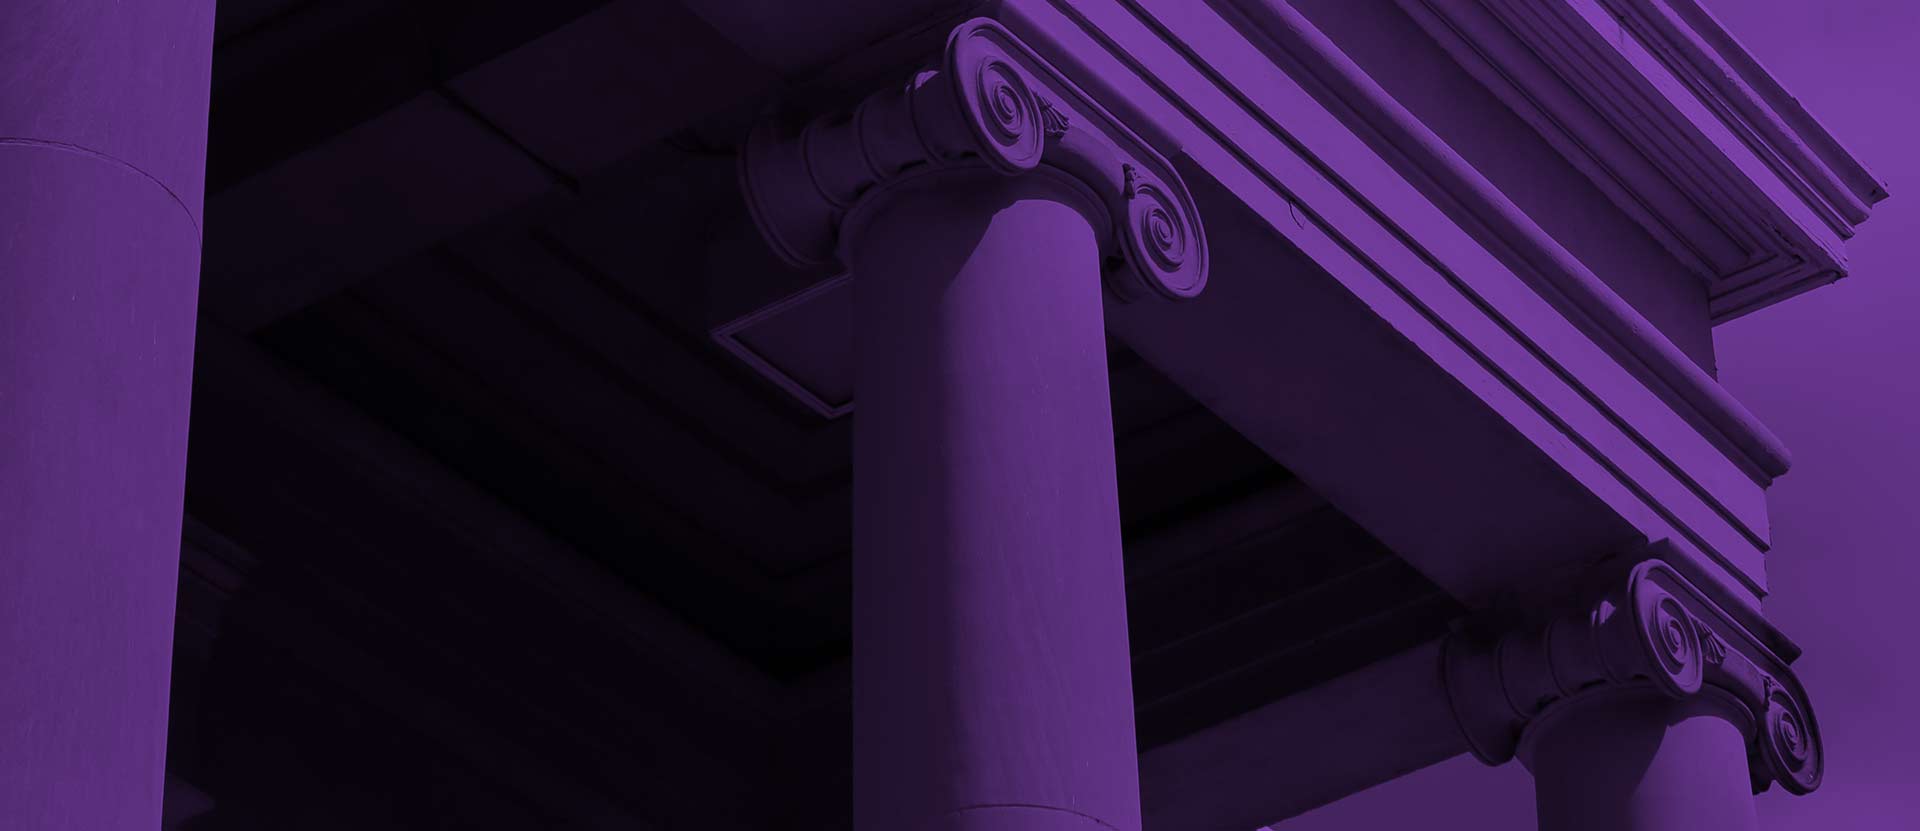 Columns of Candler building with purple overlay.